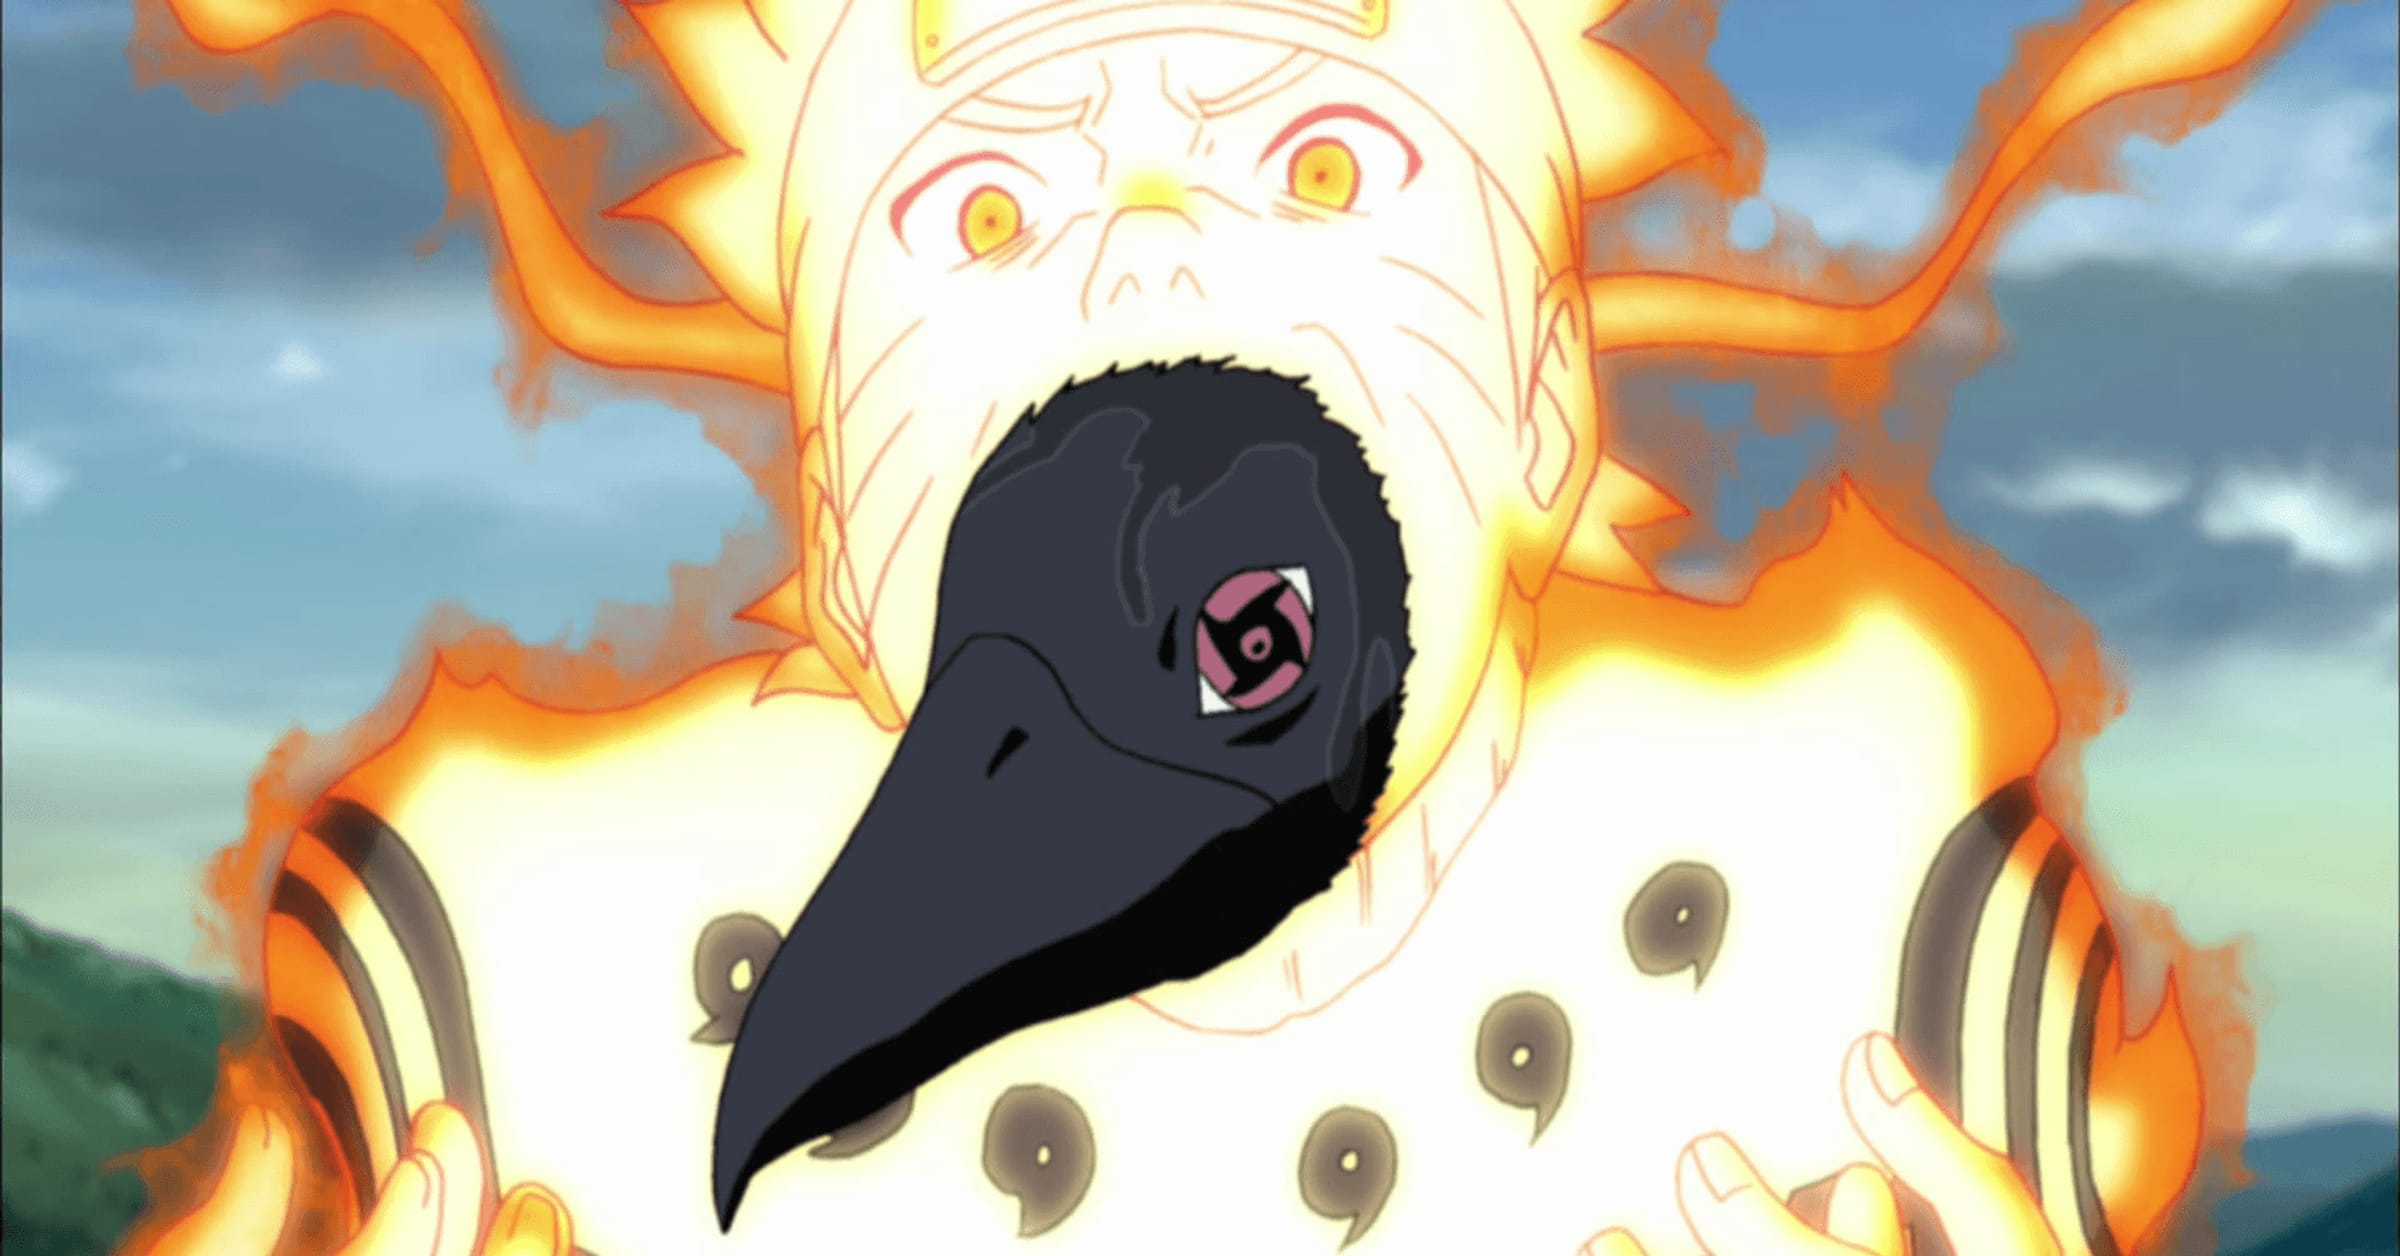 Who is Shisui Uchiha? Background, Abilities, Teams, Clans, Powers